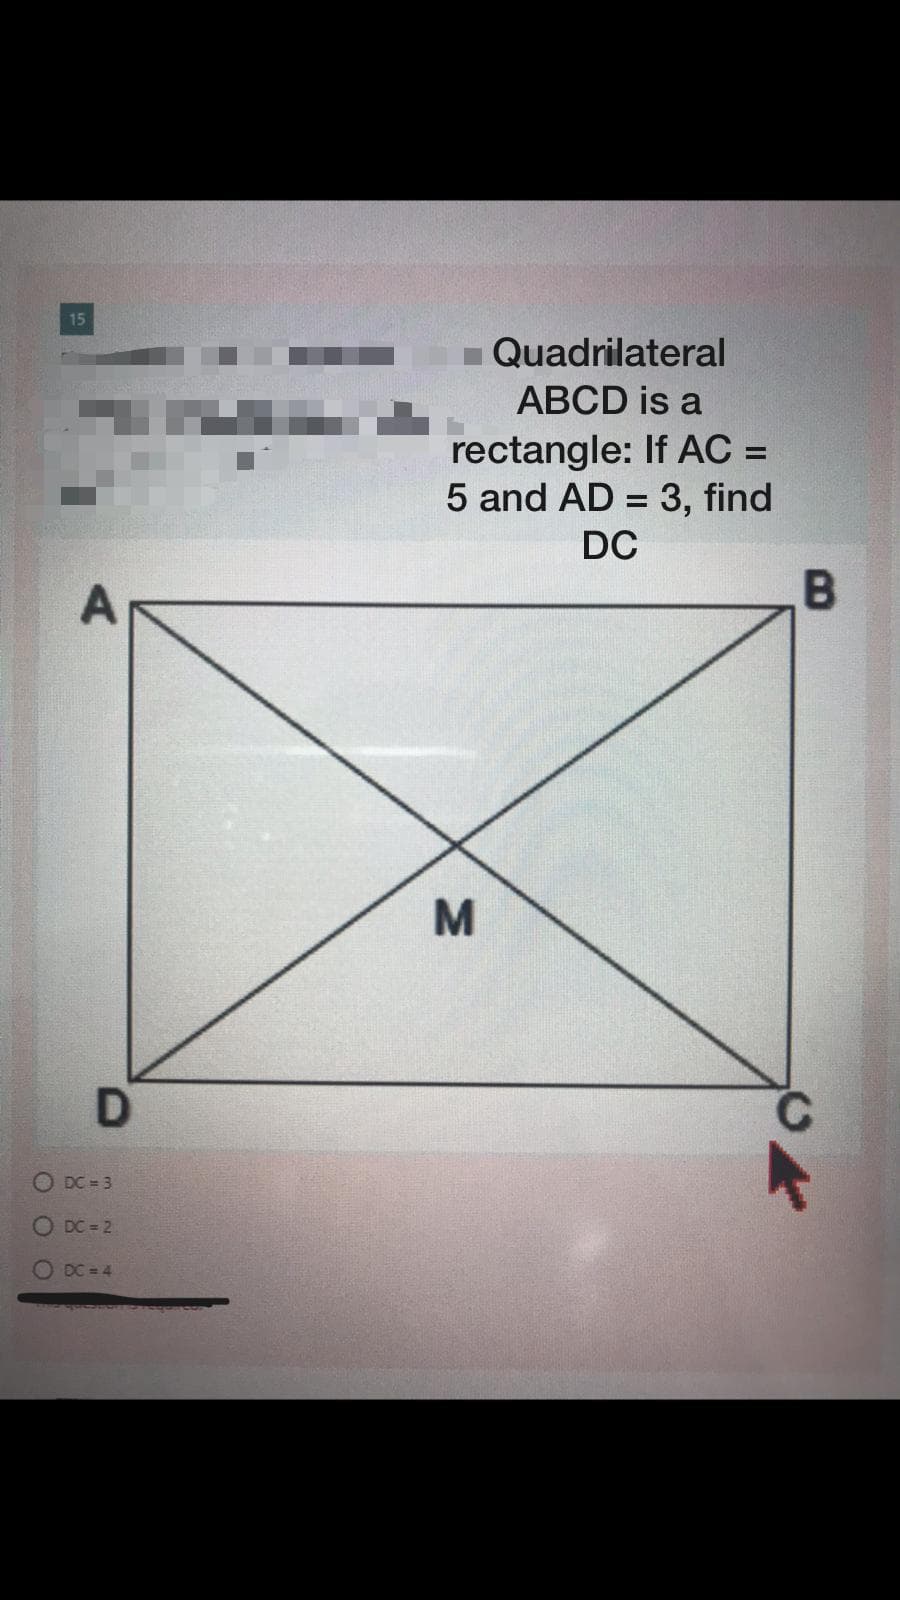 15
- Quadrilateral
ABCD is a
rectangle: If AC =
5 and AD = 3, find
DC
B
M
C.
O DC = 3
O DC = 2
O DC = 4
